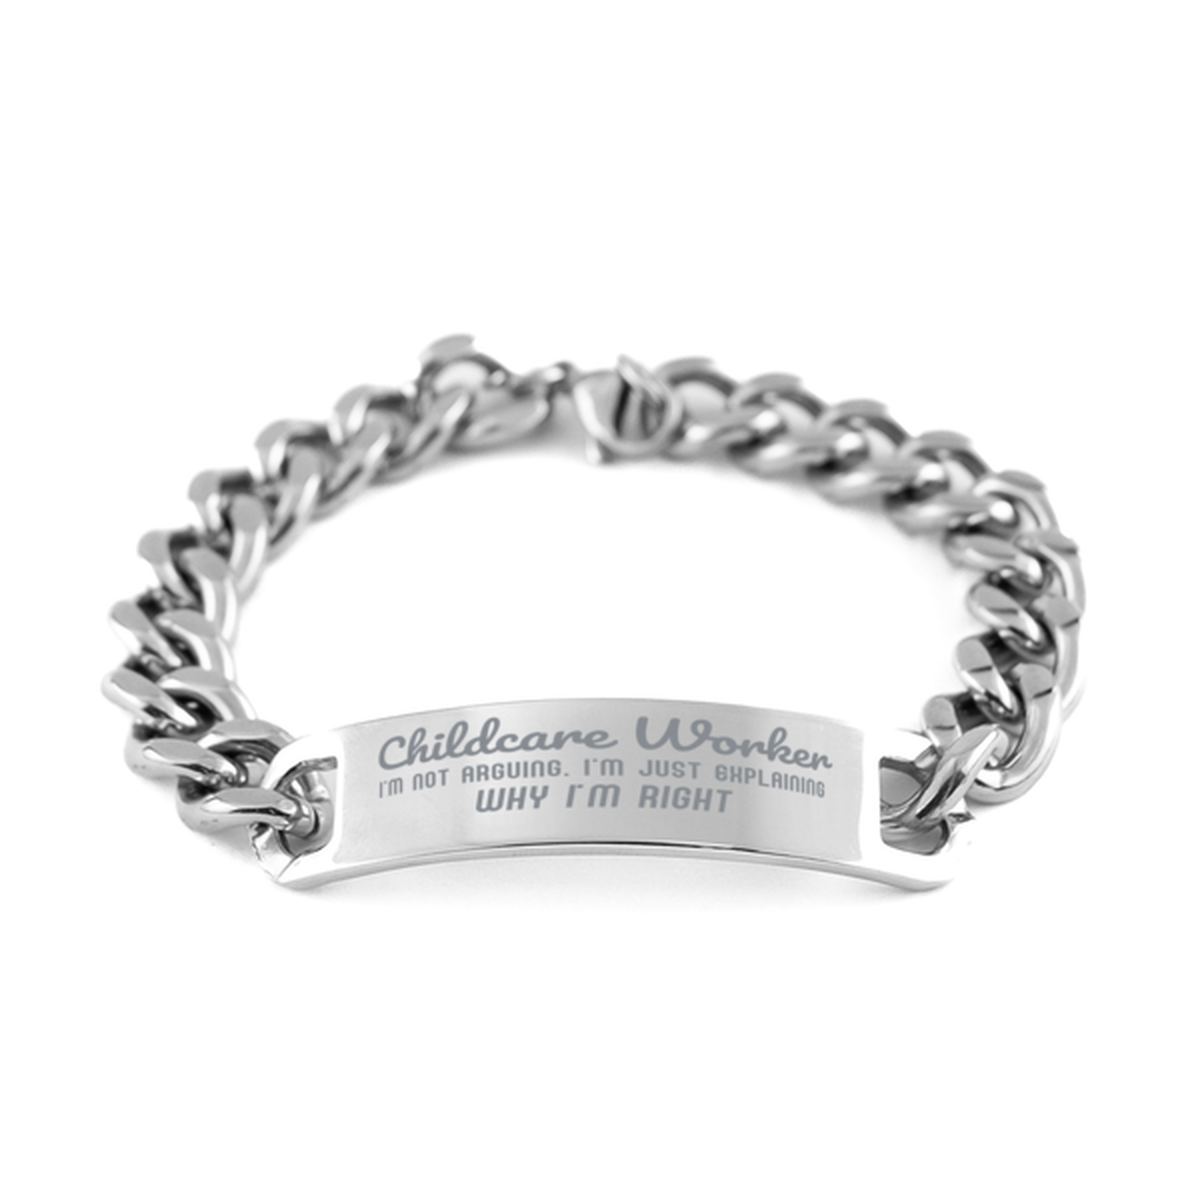 Childcare Worker I'm not Arguing. I'm Just Explaining Why I'm RIGHT Cuban Chain Stainless Steel Bracelet, Graduation Birthday Christmas Childcare Worker Gifts For Childcare Worker Funny Saying Quote Present for Men Women Coworker